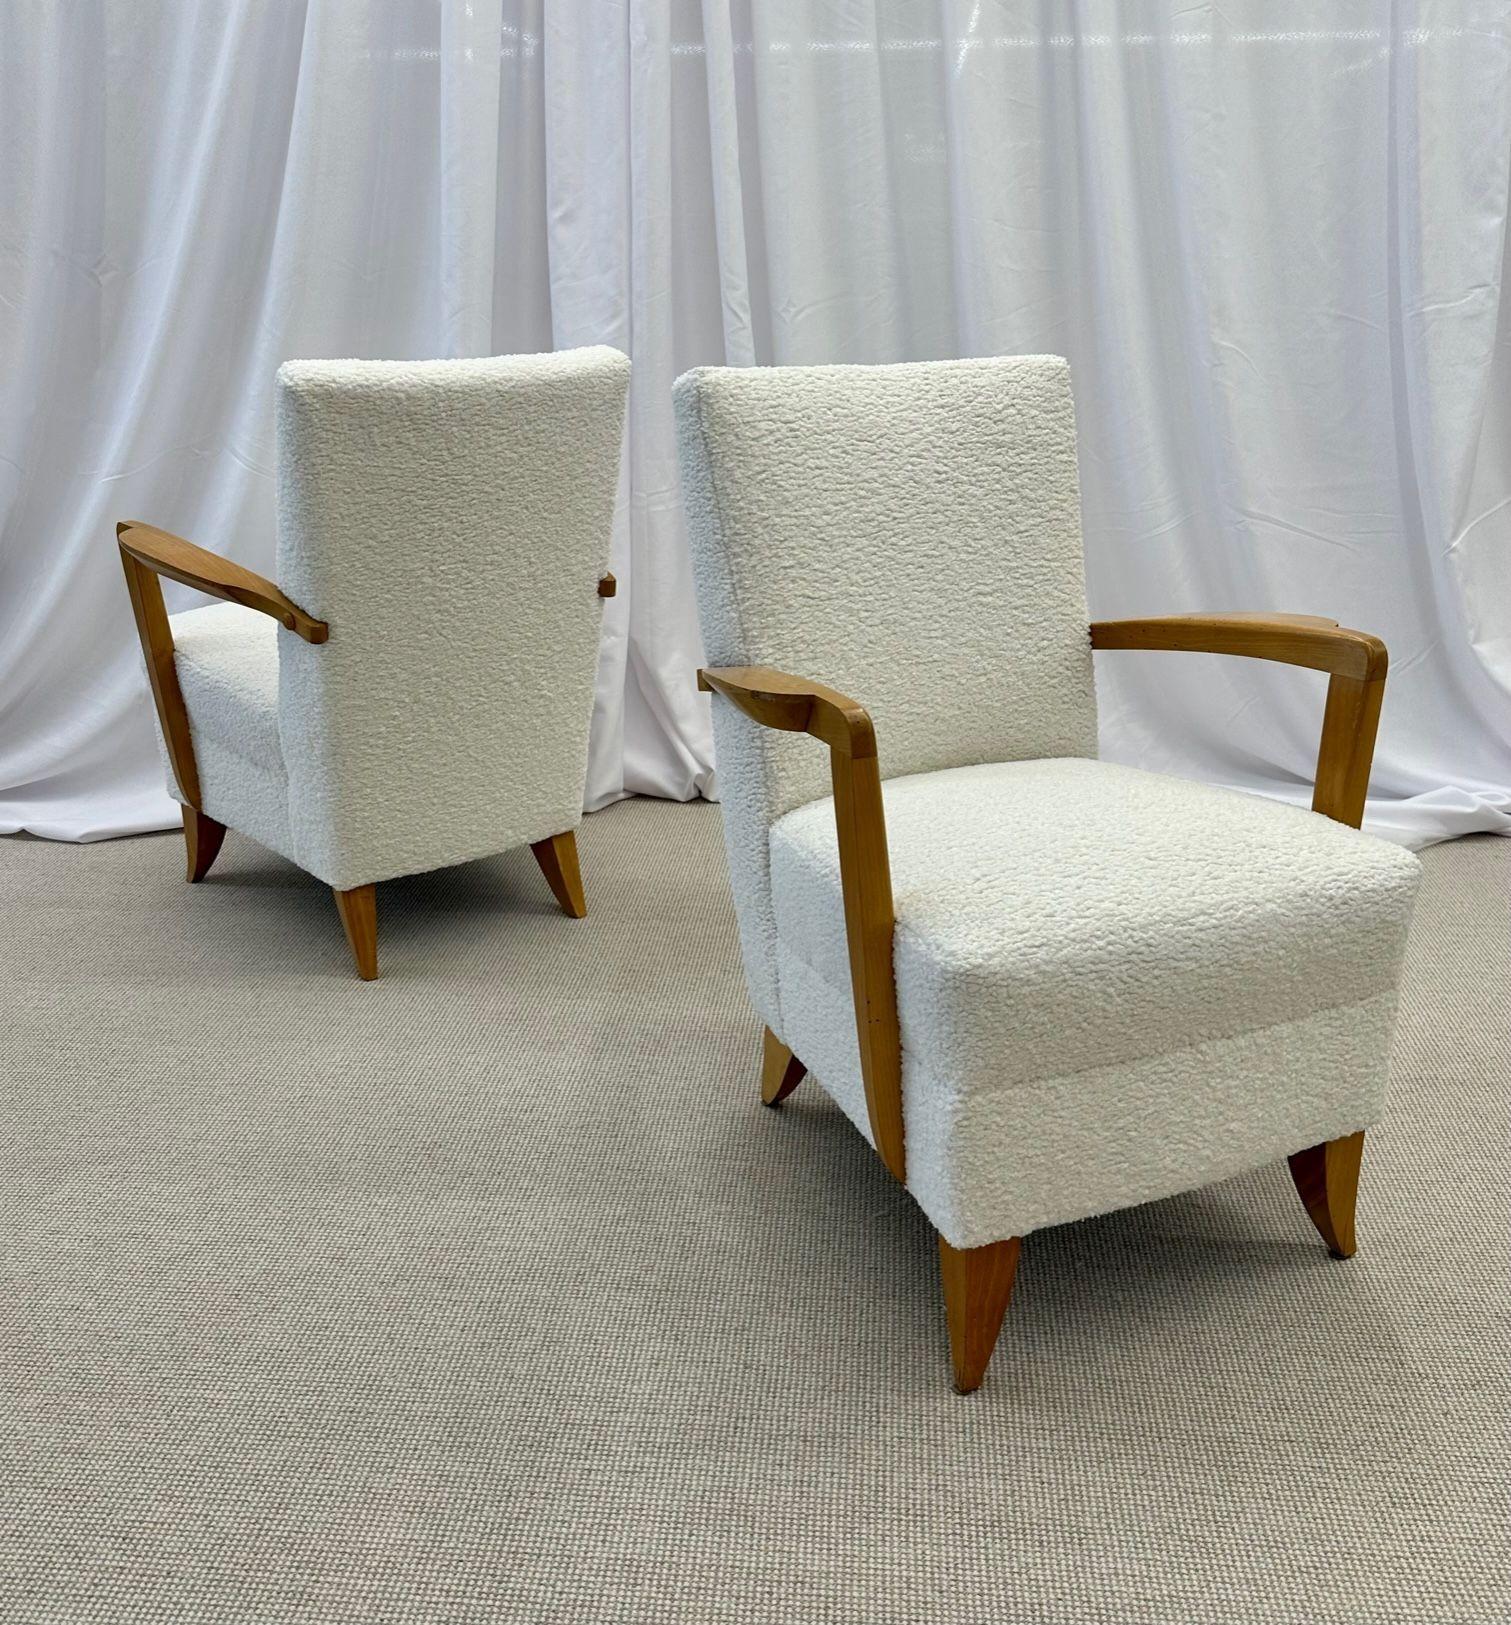 Pair mid-century French Art Deco Arm / lounge chairs by Maison Dominque, Boucle

Rare pair of chic French deco geometric accent chairs by Andre Domin and Marcel Genevriere for Maison Dominque; newly re-upholstered in a gorgeous white boucle textured